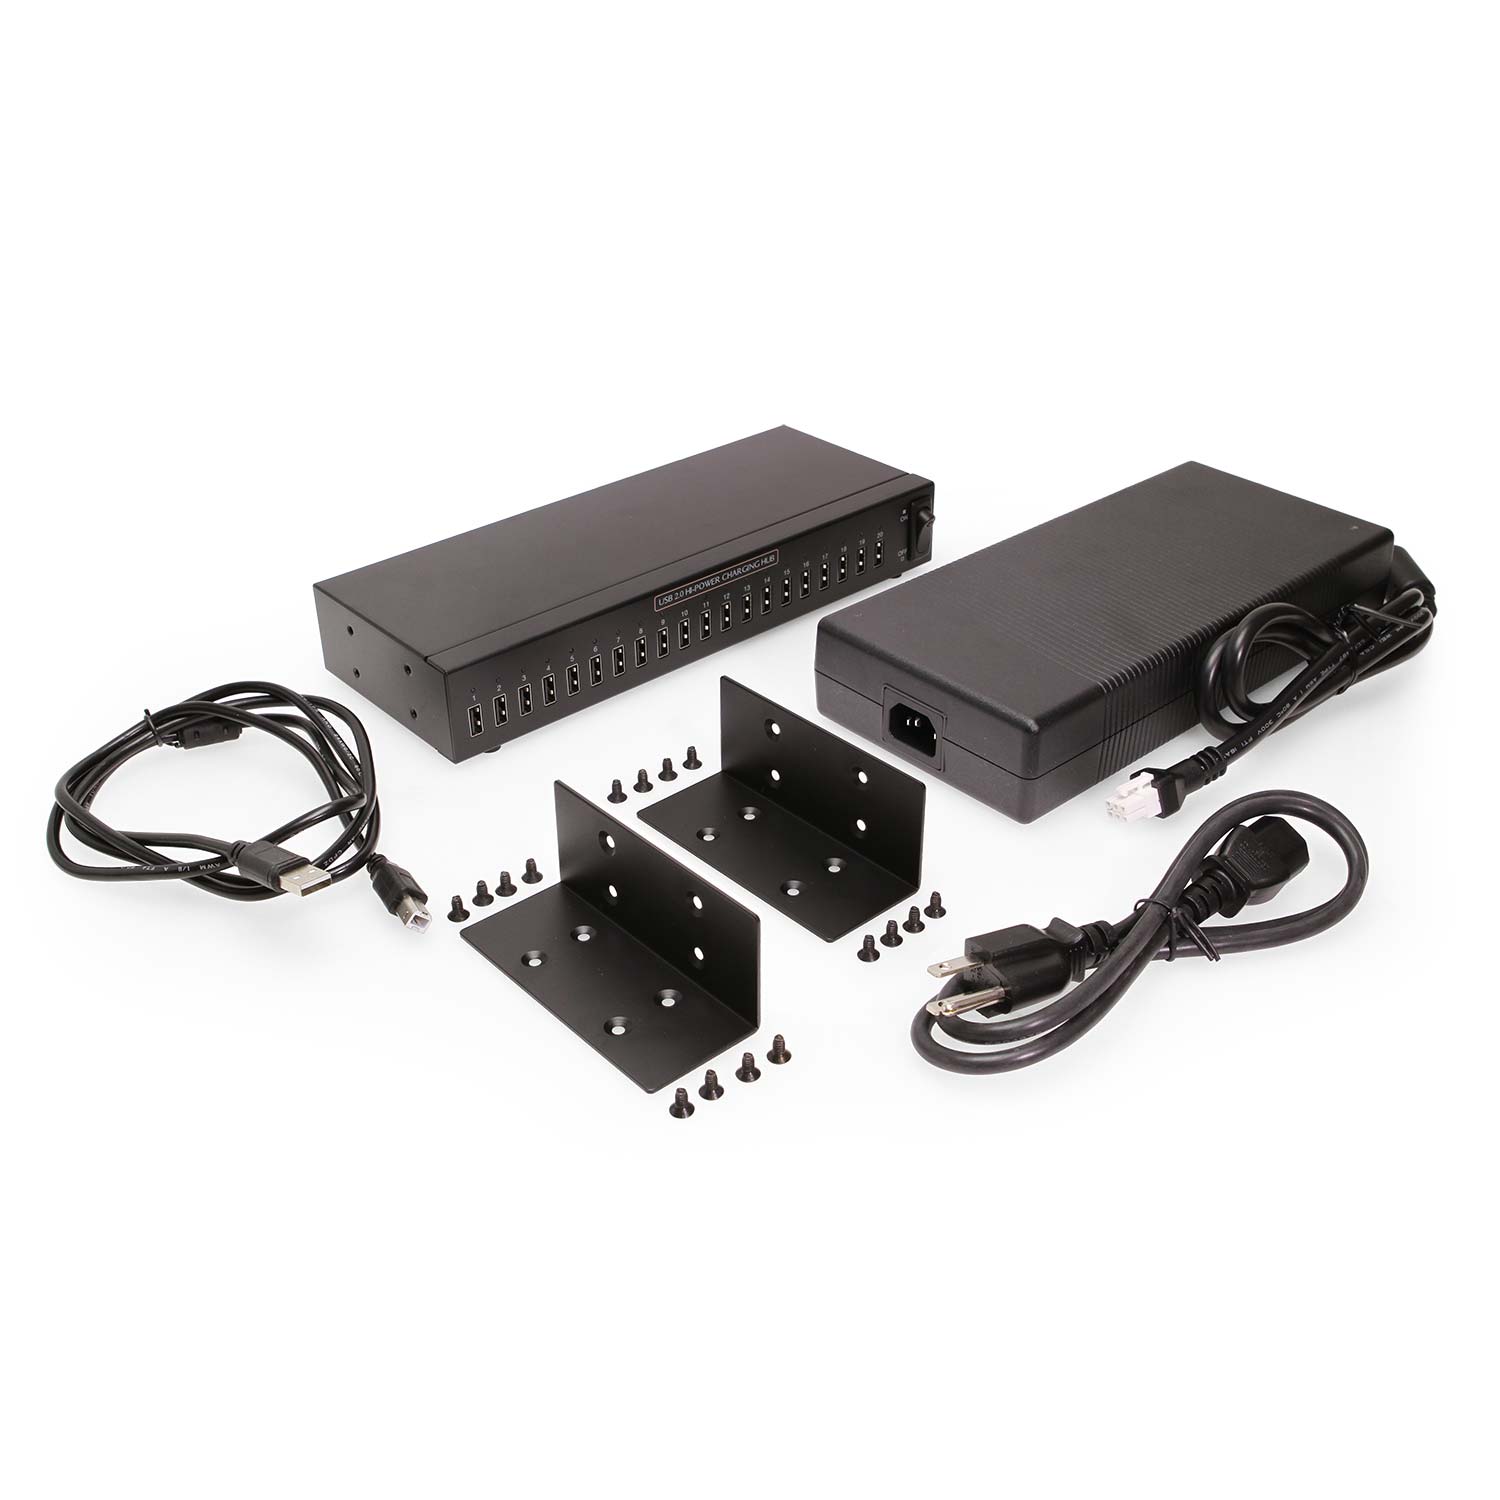 20 Port USB  Industrial High Power  Charging Hub w/ ESD Surge  Protection & Port Status LEDs - Coolgear